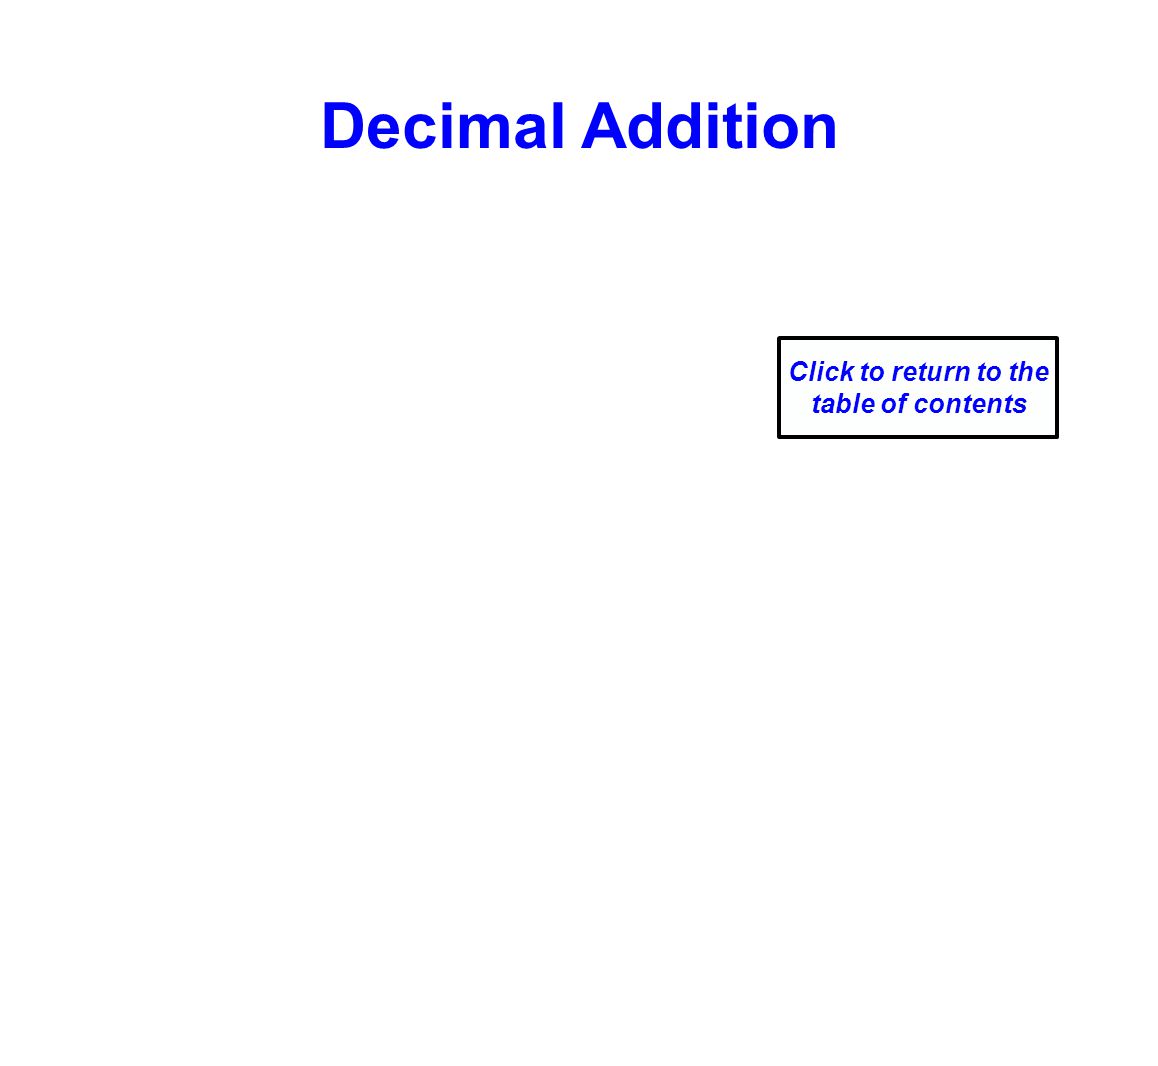 Decimal Addition Click to return to the table of contents